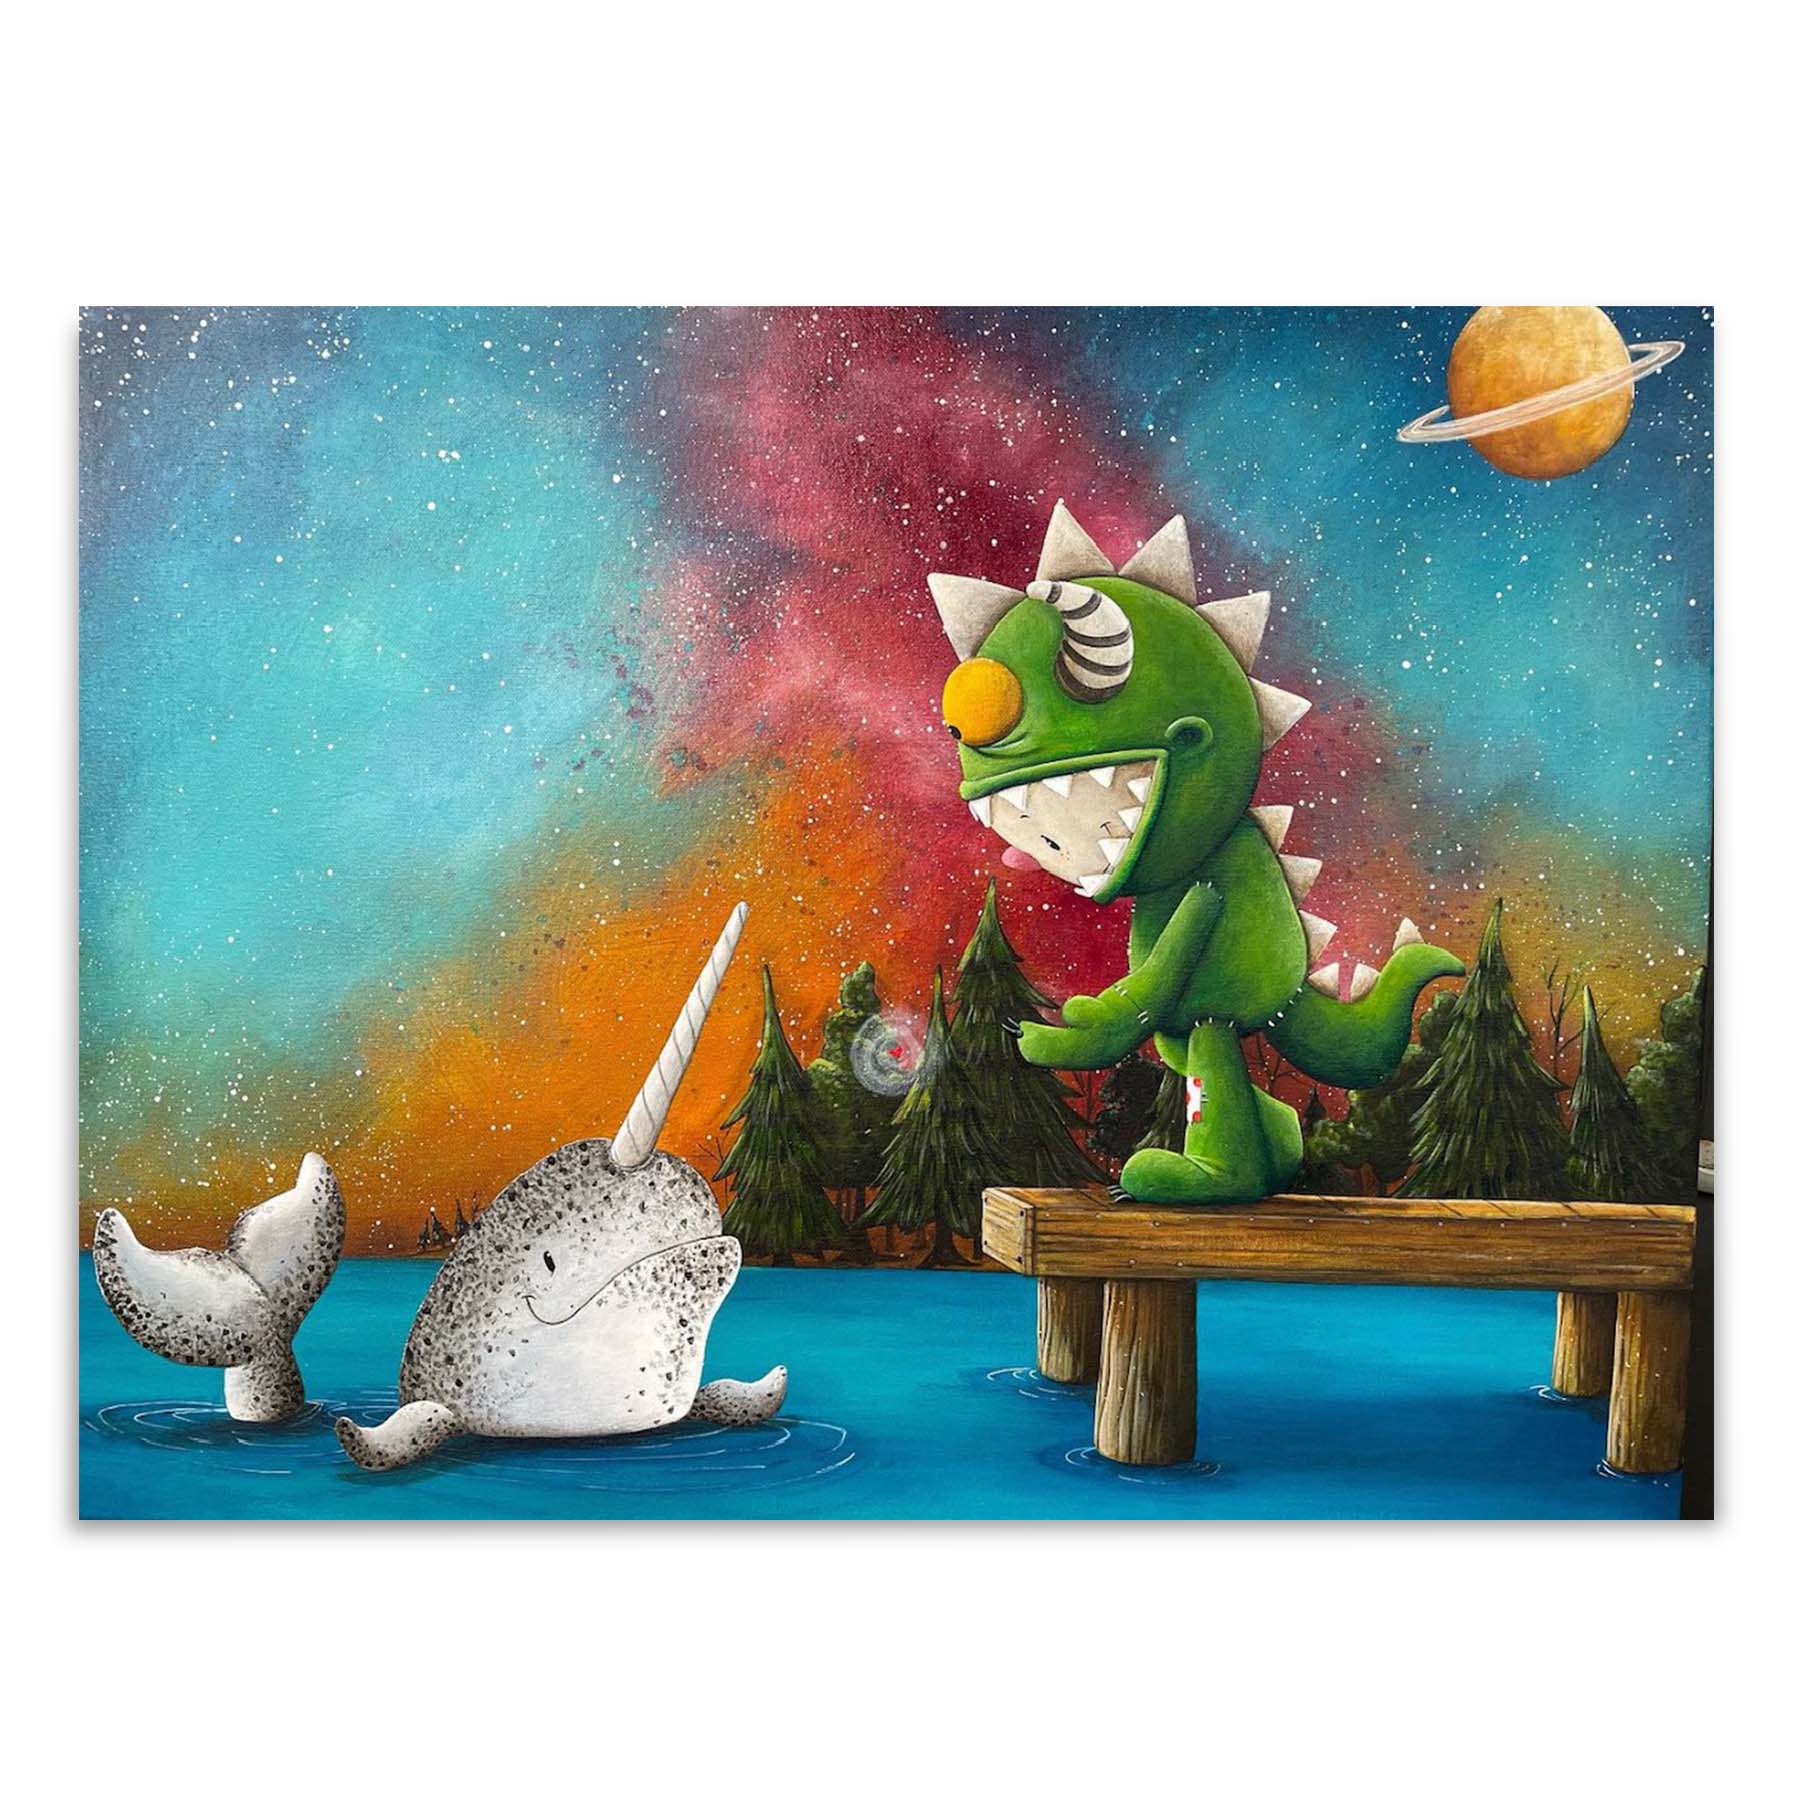 Fabio Napoleoni "The Feeling is Mutual" Limited Edition Canvas Giclee